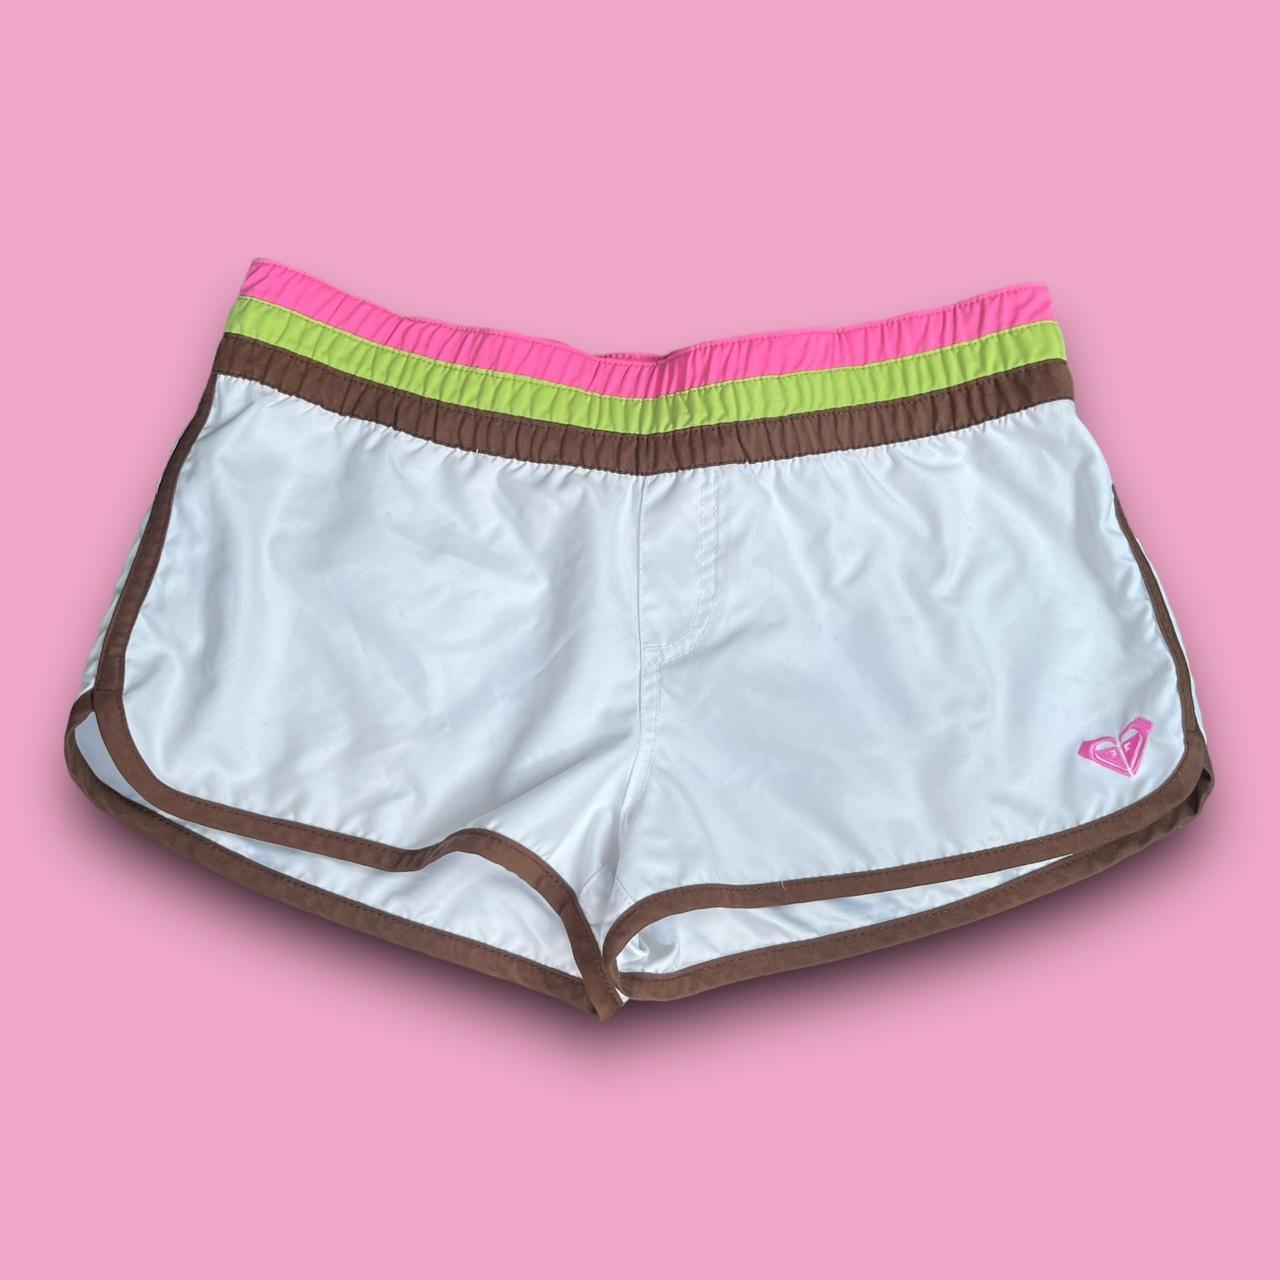 Roxy Women's White and Pink Shorts